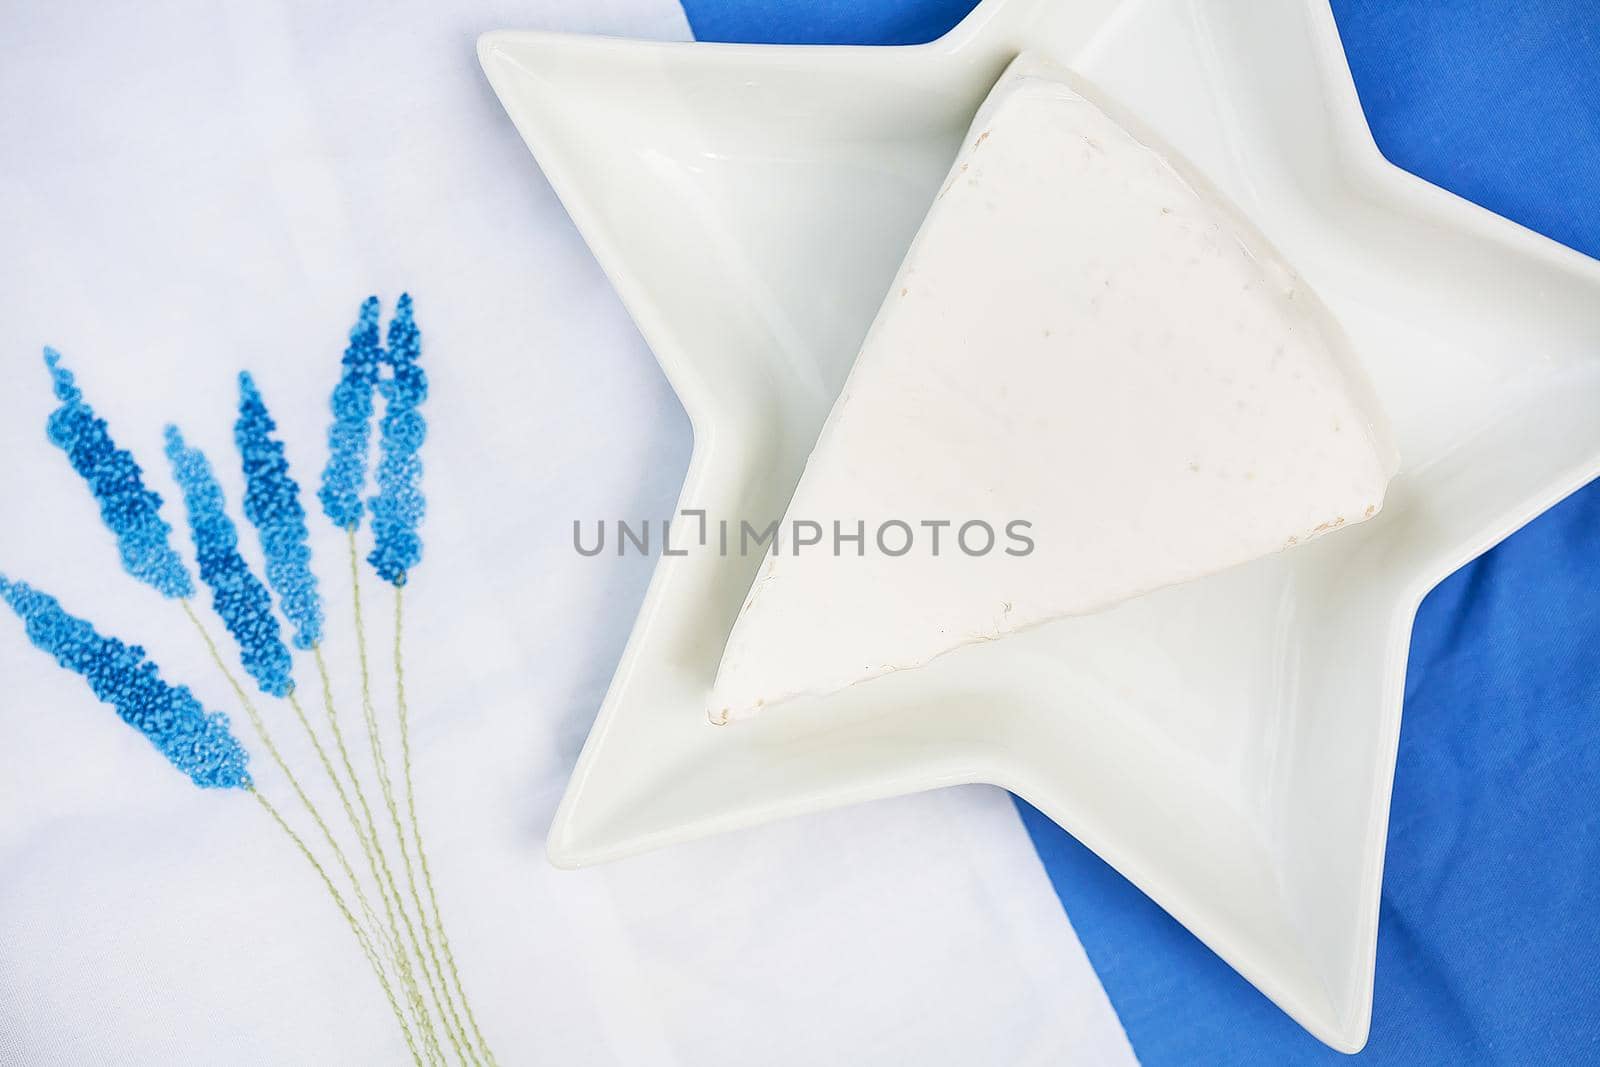 brie cheese in a plate on a blue tablecloth